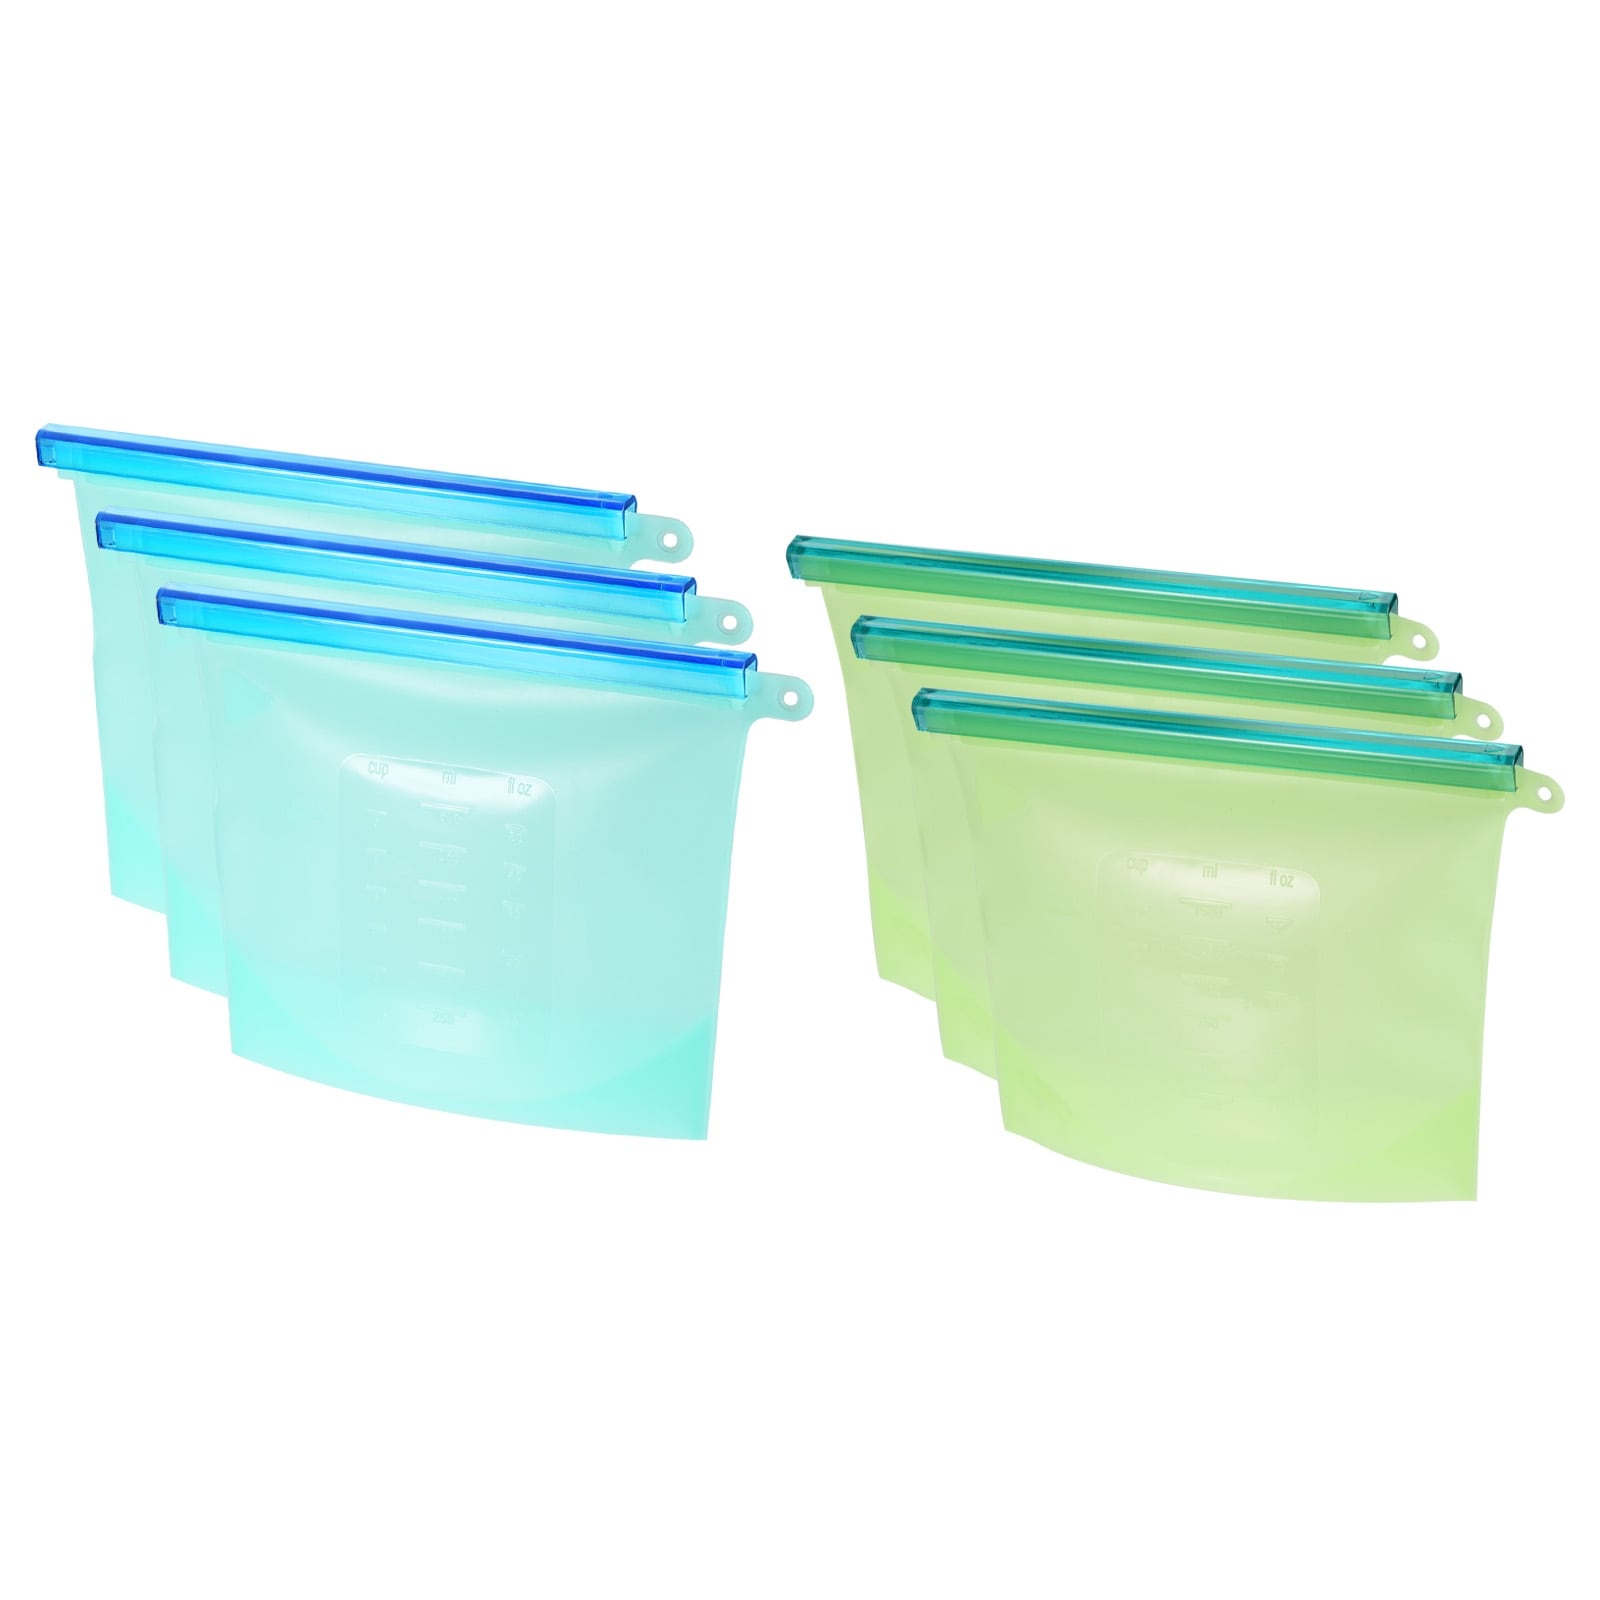 https://ak1.ostkcdn.com/images/products/is/images/direct/e7a149ad205a18f931e1532bd25e1521ea51f789/Silicone-Storage-Bags-Reusable-Food-Storage-Containers-Freezer-Bags-Blue%2BGreen.jpg